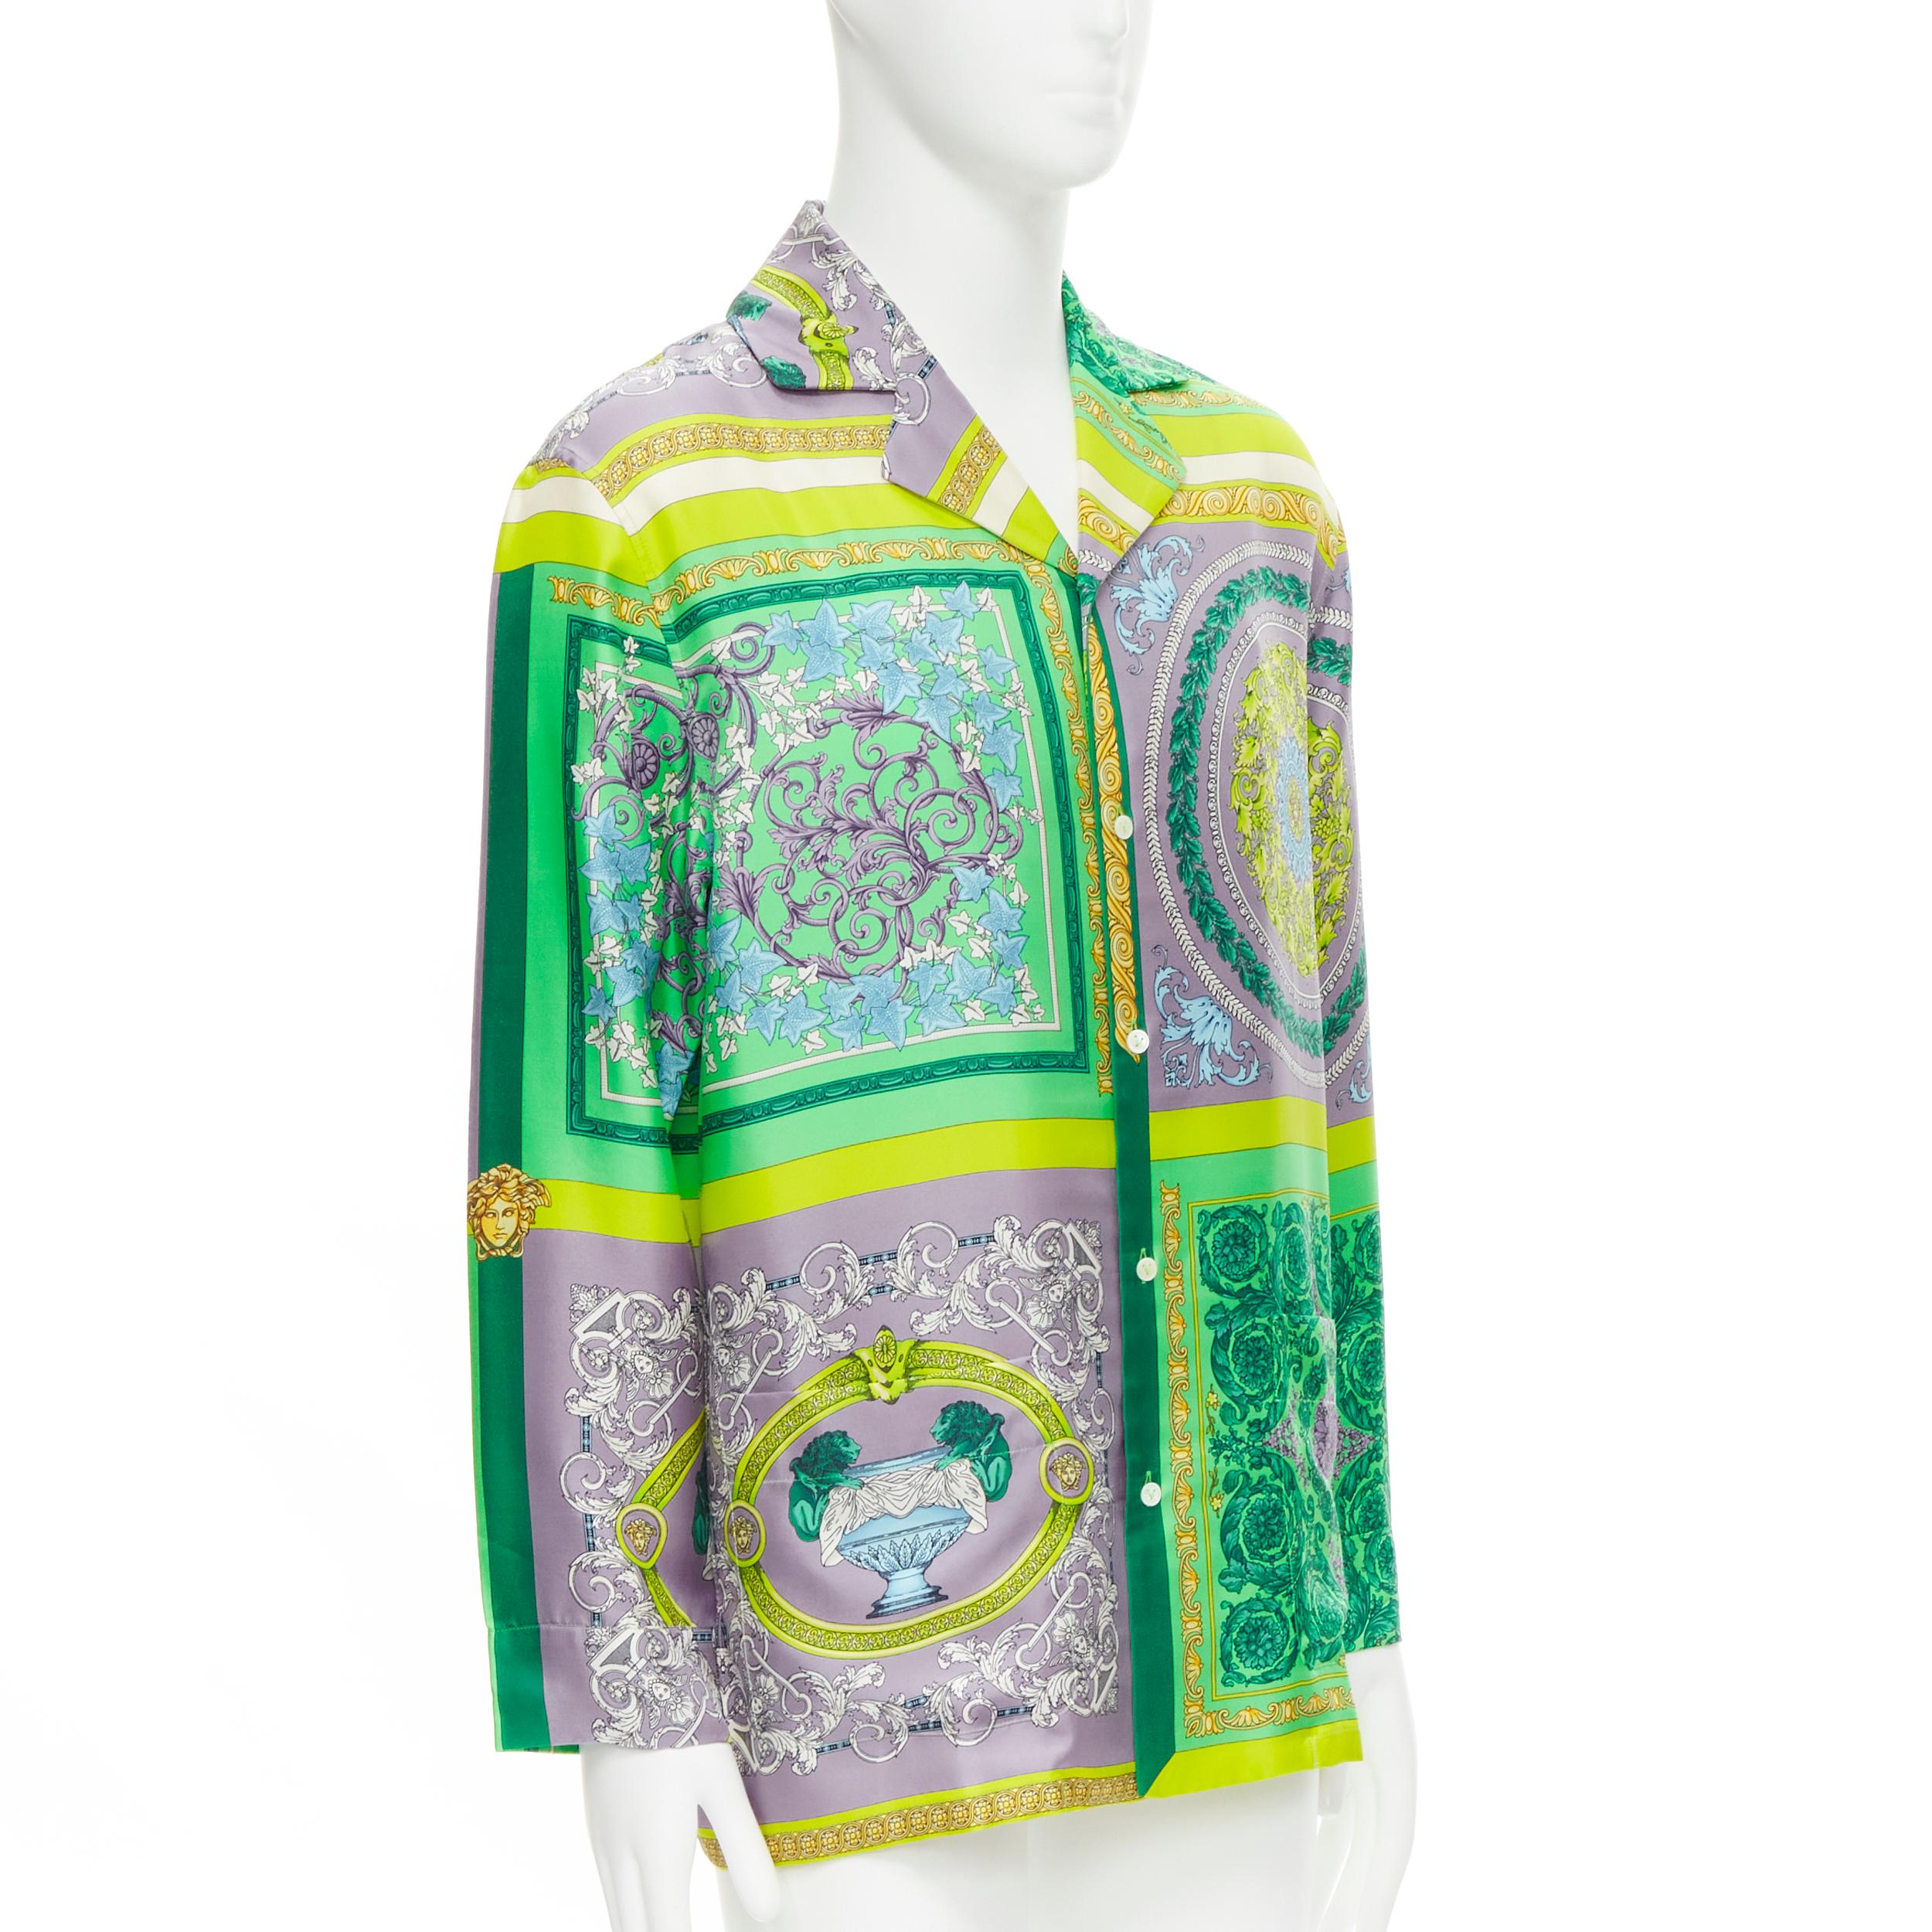 new VERSACE Pop Mosaic Barocco green purple silk pajama shirt IT1 S
Reference: TGAS/C01009
Brand: Versace
Designer: Donatella Versace
Collection: Pop Mosaic Barocco 
As seen on: Justin Bieber
Material: Silk
Color: Green
Pattern: Floral
Closure: